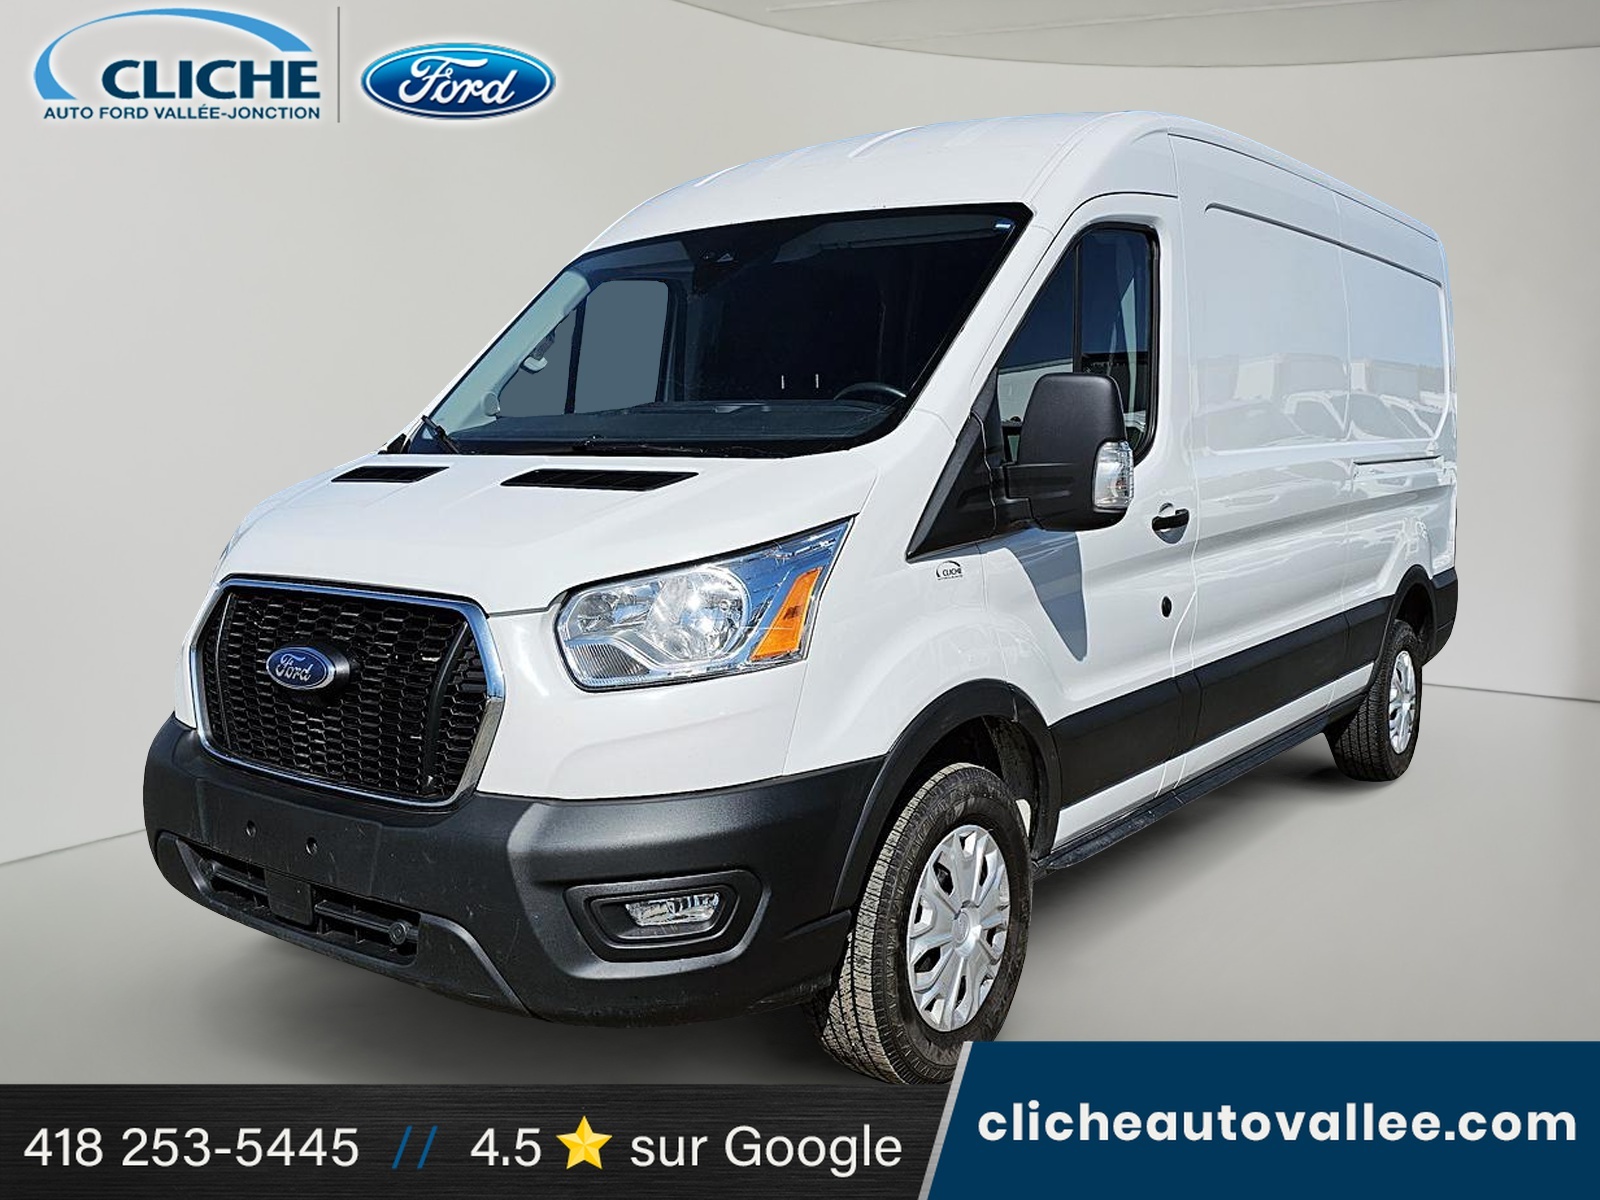 2021 Ford Transit T-250, MED ROOF, 148 PCES, ENS. REMORQUAGE